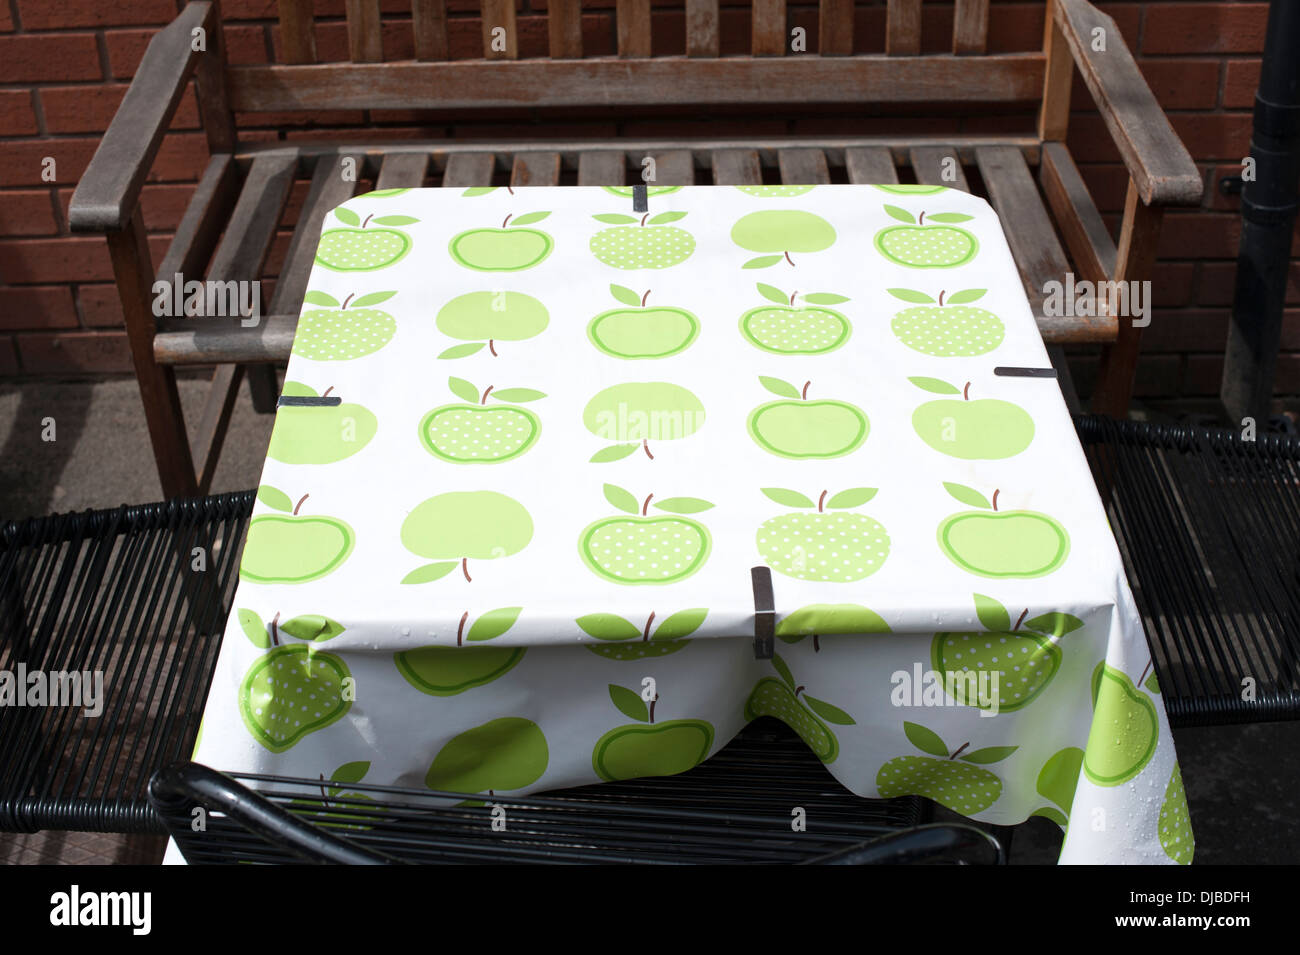 Bright Green Apples Tablecloth Cafe Healthy Food Stock Photo